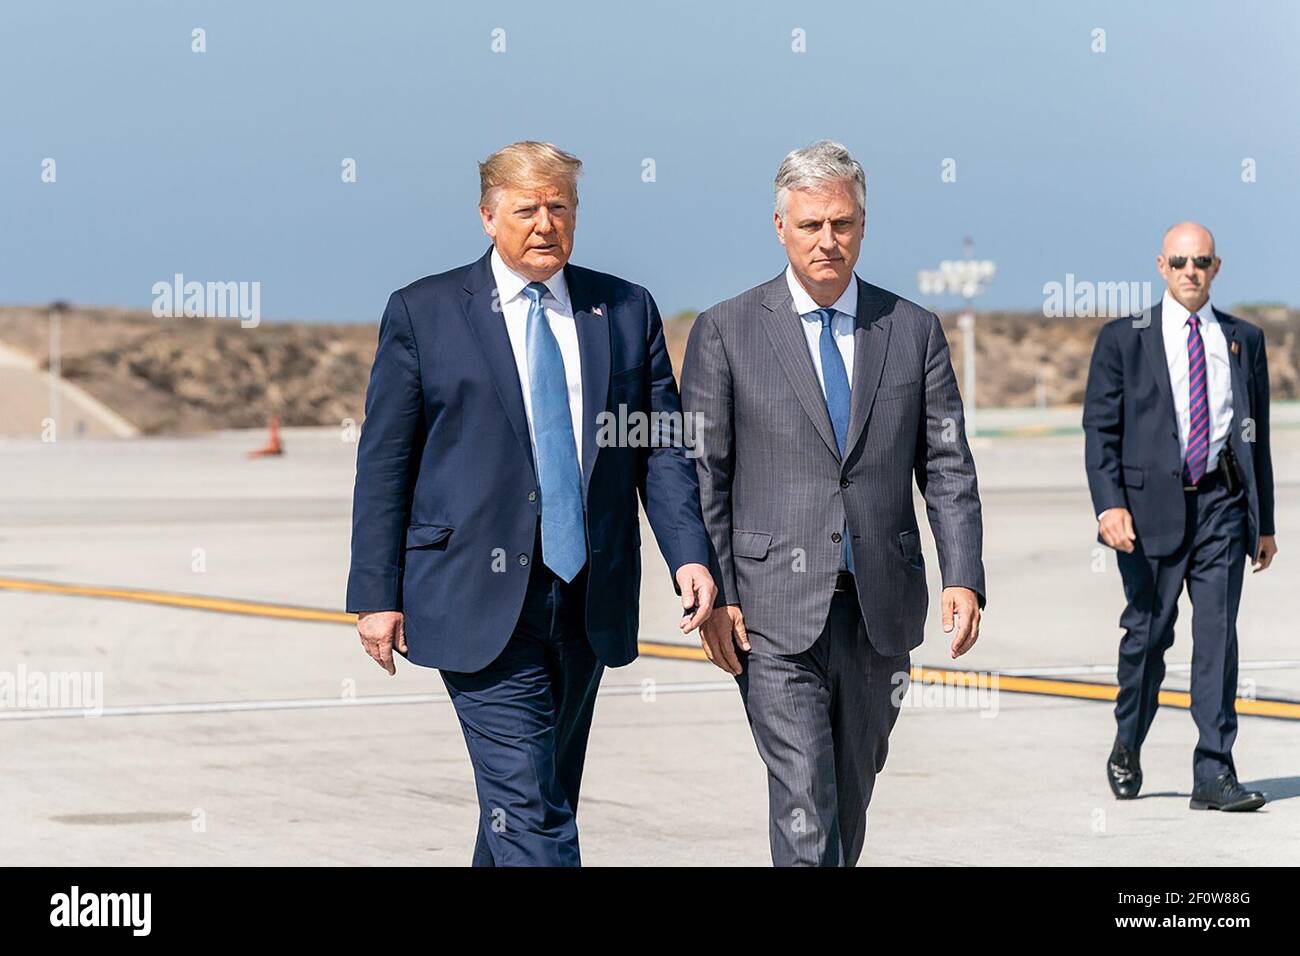 President Donald Trump joined by newly named White House National Security Advisor Robert C. O'Brien disembarks Marine One Wednesday Sept. 18 2019 prior to boarding Air Force One at Los Angeles International Airport for his flight to San Diego Calif. Stock Photo